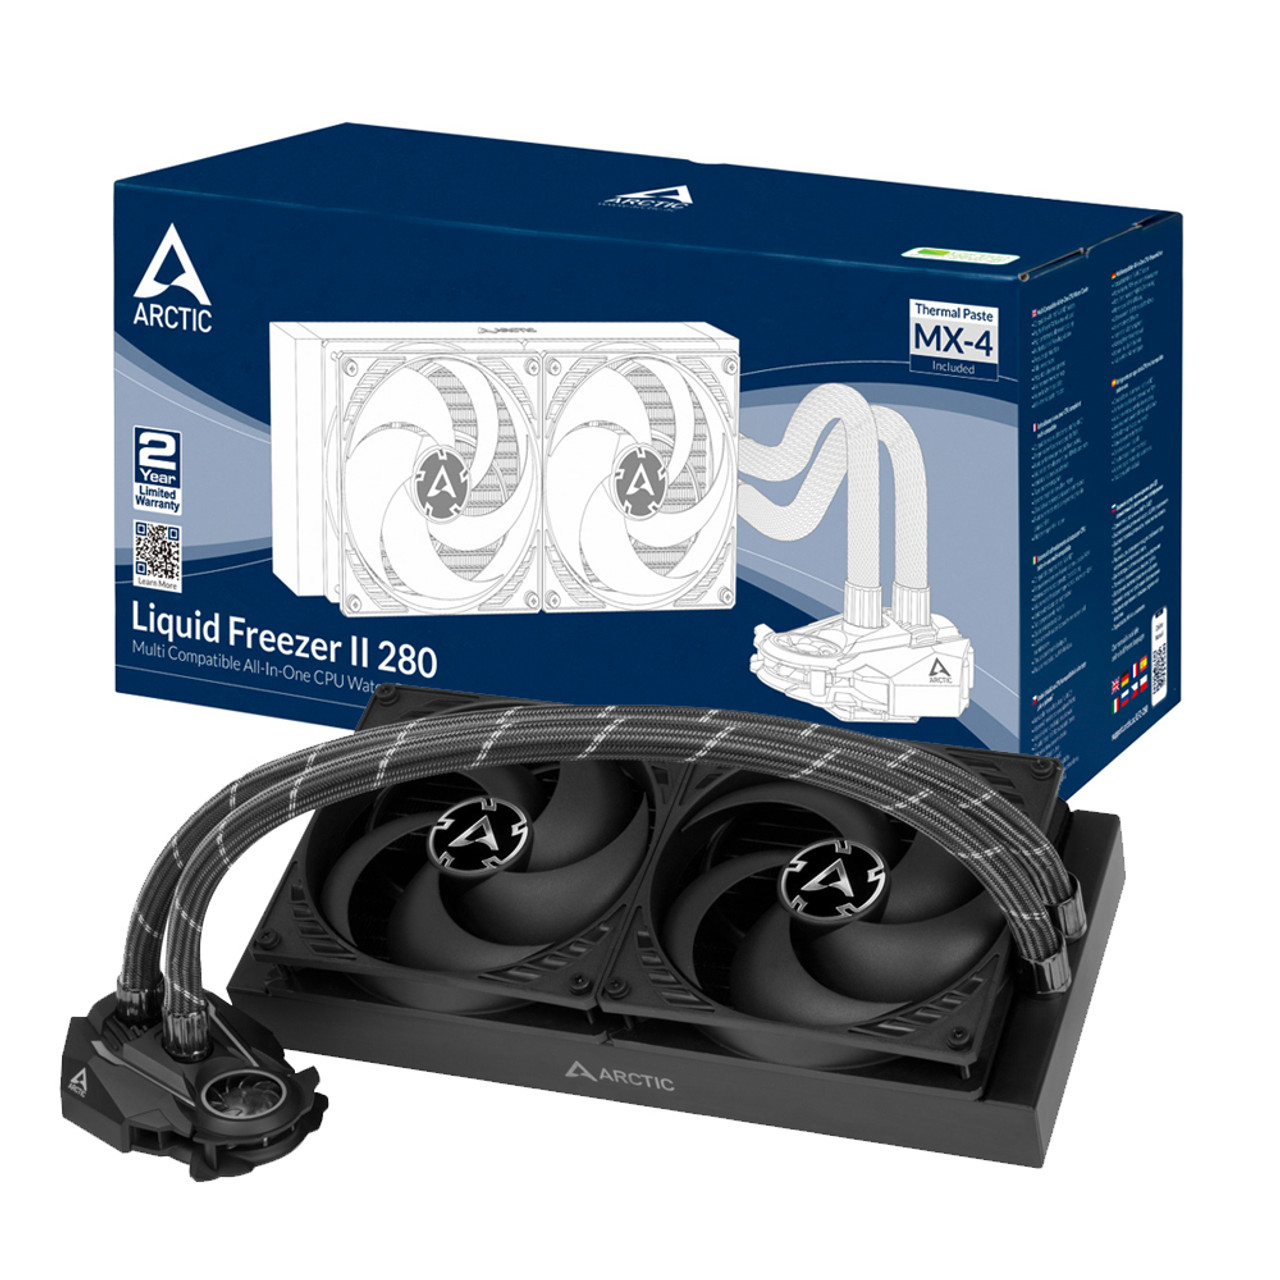 ARCTIC Liquid Freezer II 240 - Multi Compatible All-in-One CPU Water  Cooler, Efficient PWM Controlled Pump, Compatible with Intel & AMD - Black